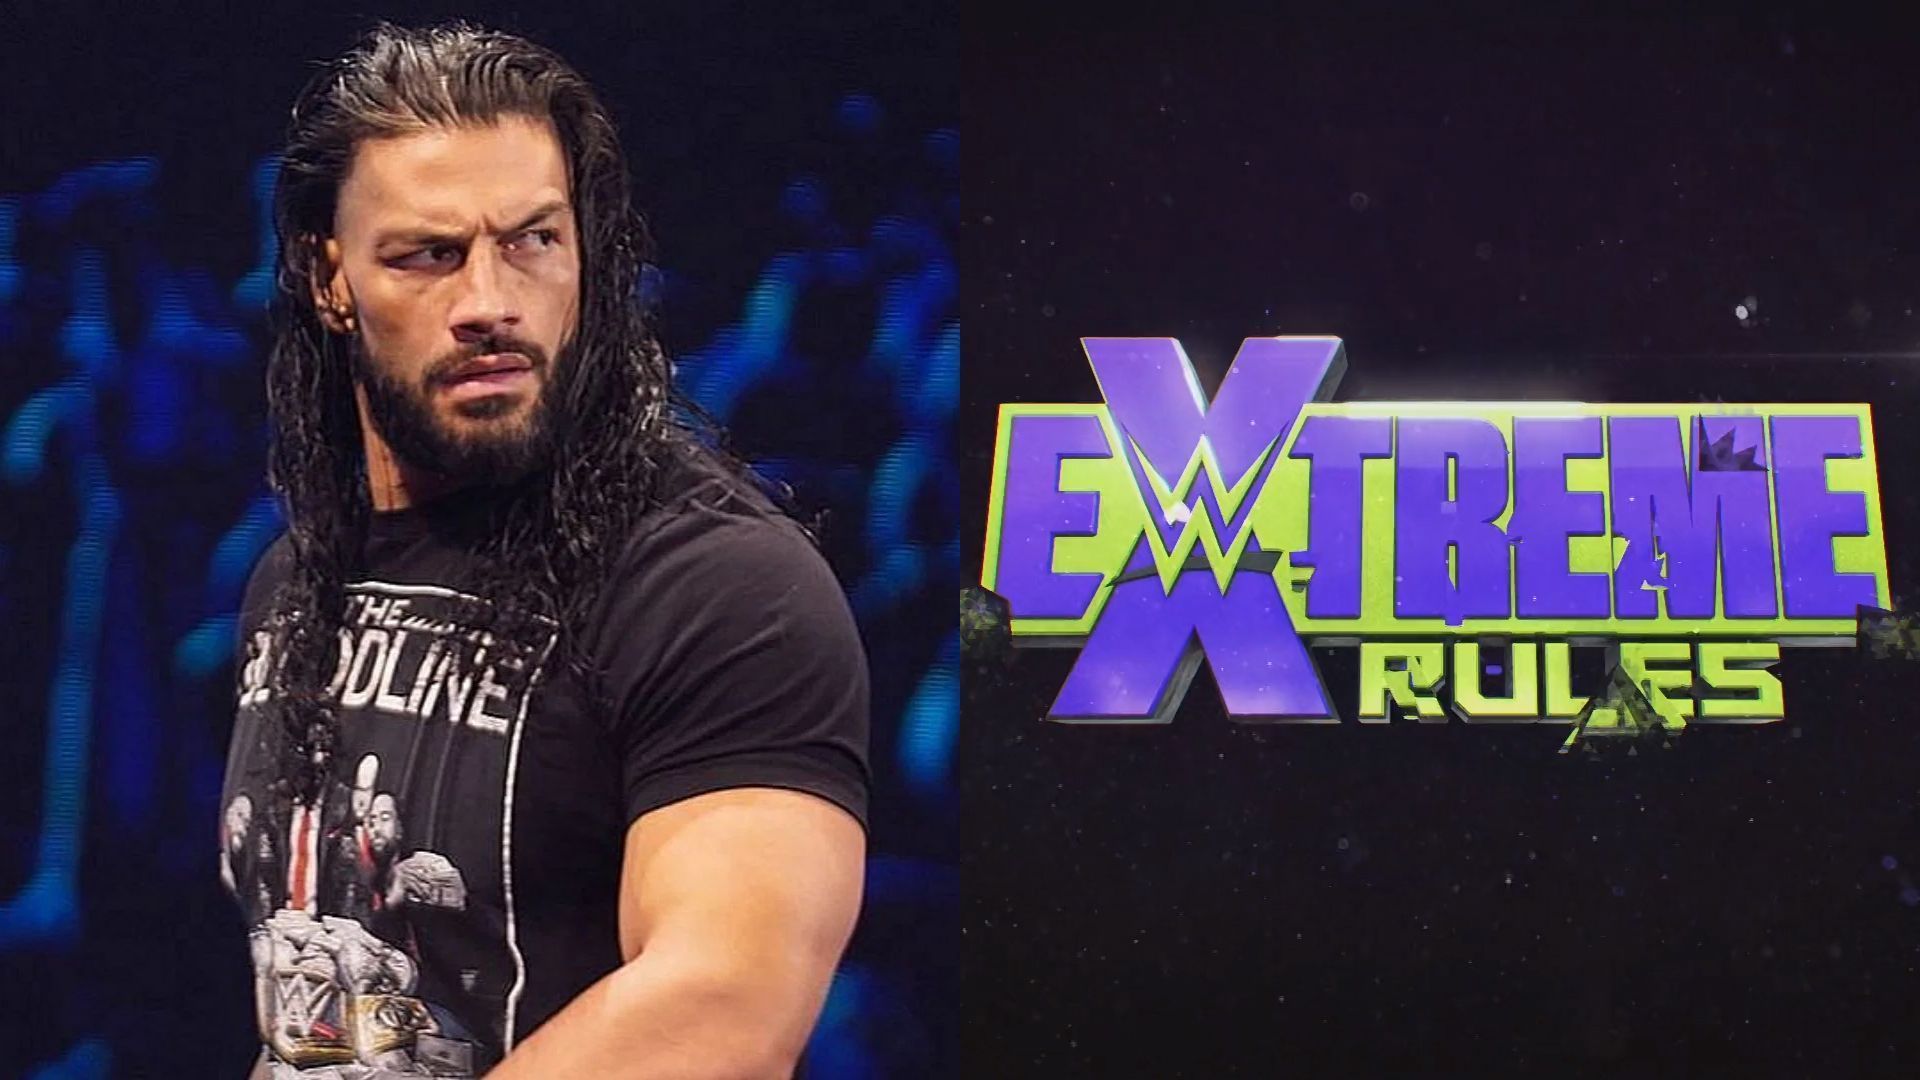 Roman Reigns is not scheduled to appear at Extreme Rules